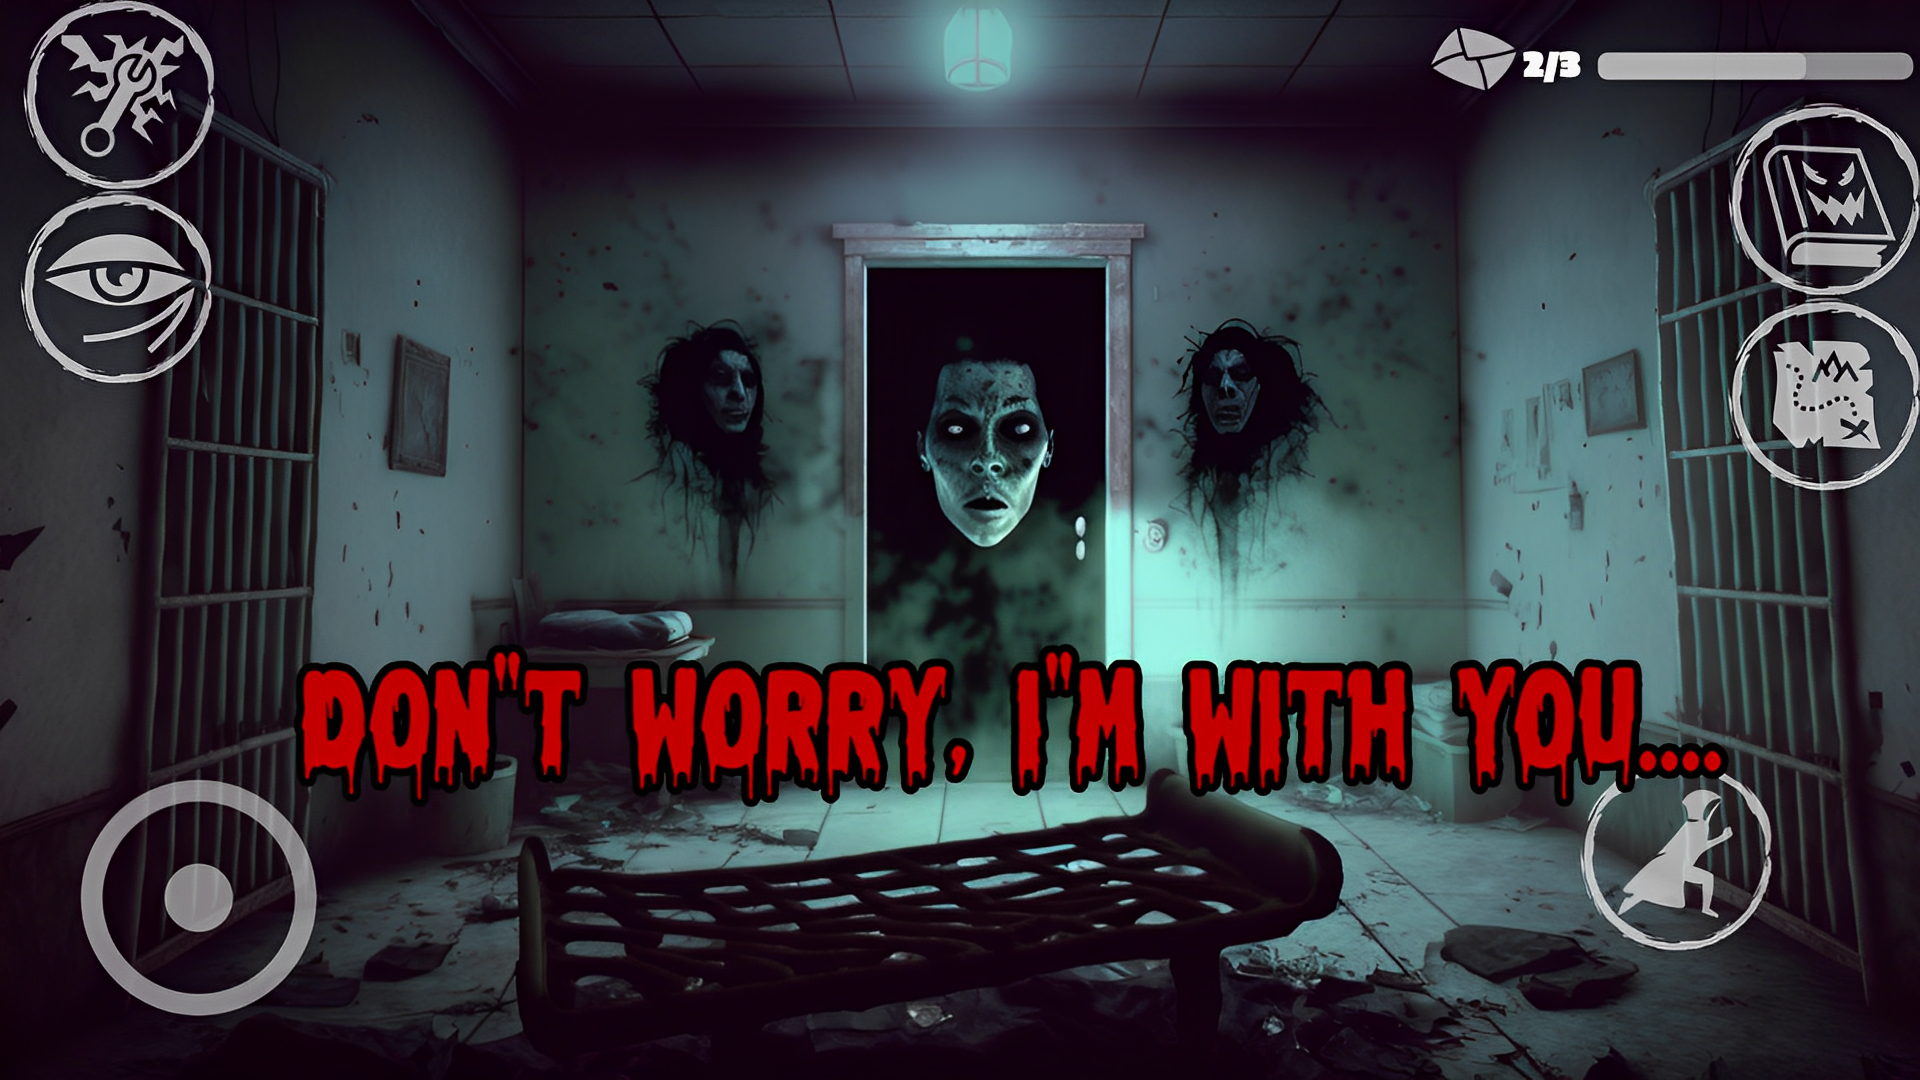 Is Eyes the horror game scary?